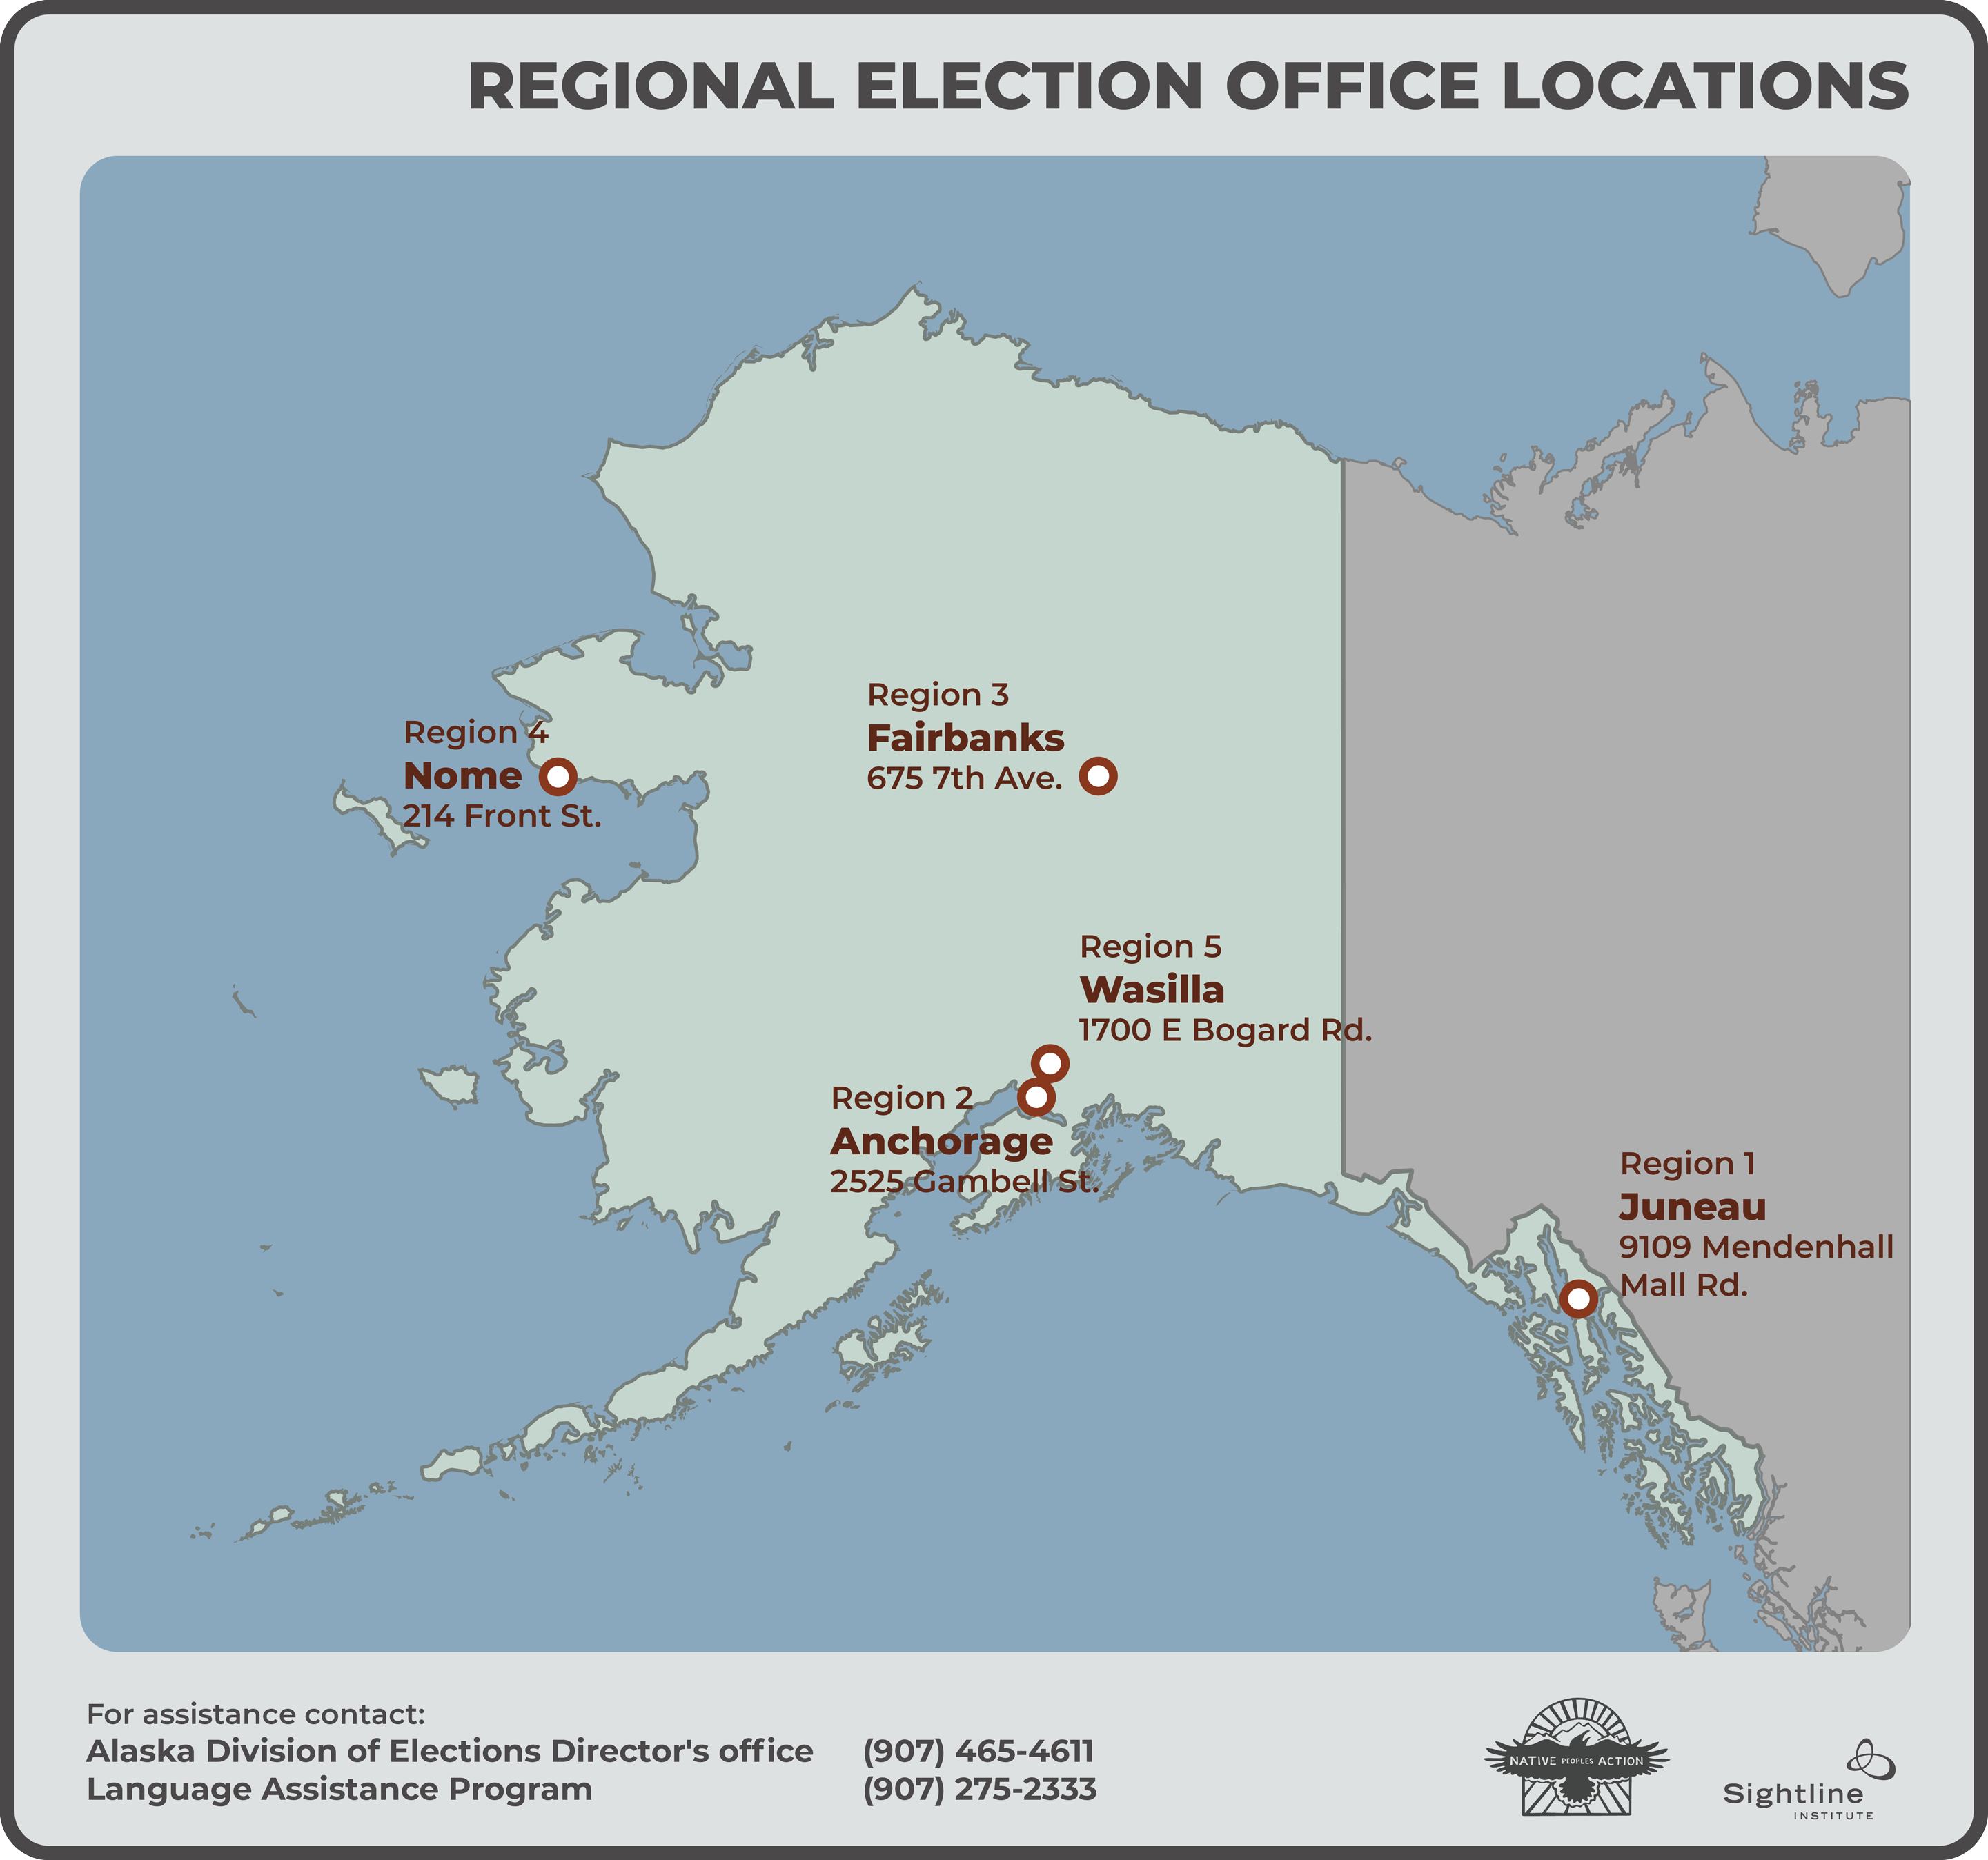 Alaska Election Map showing where regional election offices are located